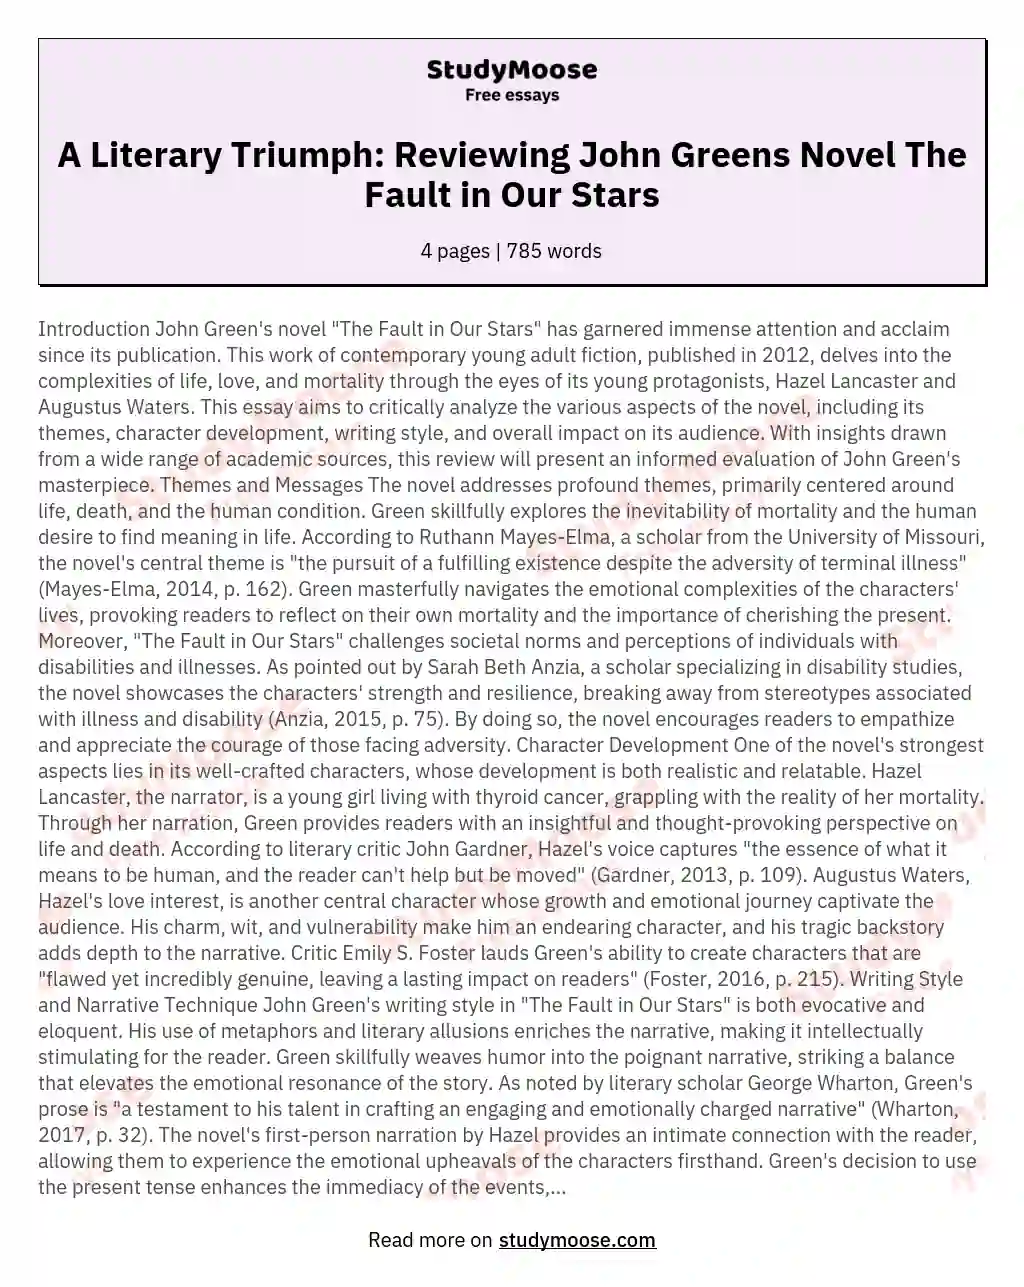 A Literary Triumph: Reviewing John Greens Novel The Fault in Our Stars essay